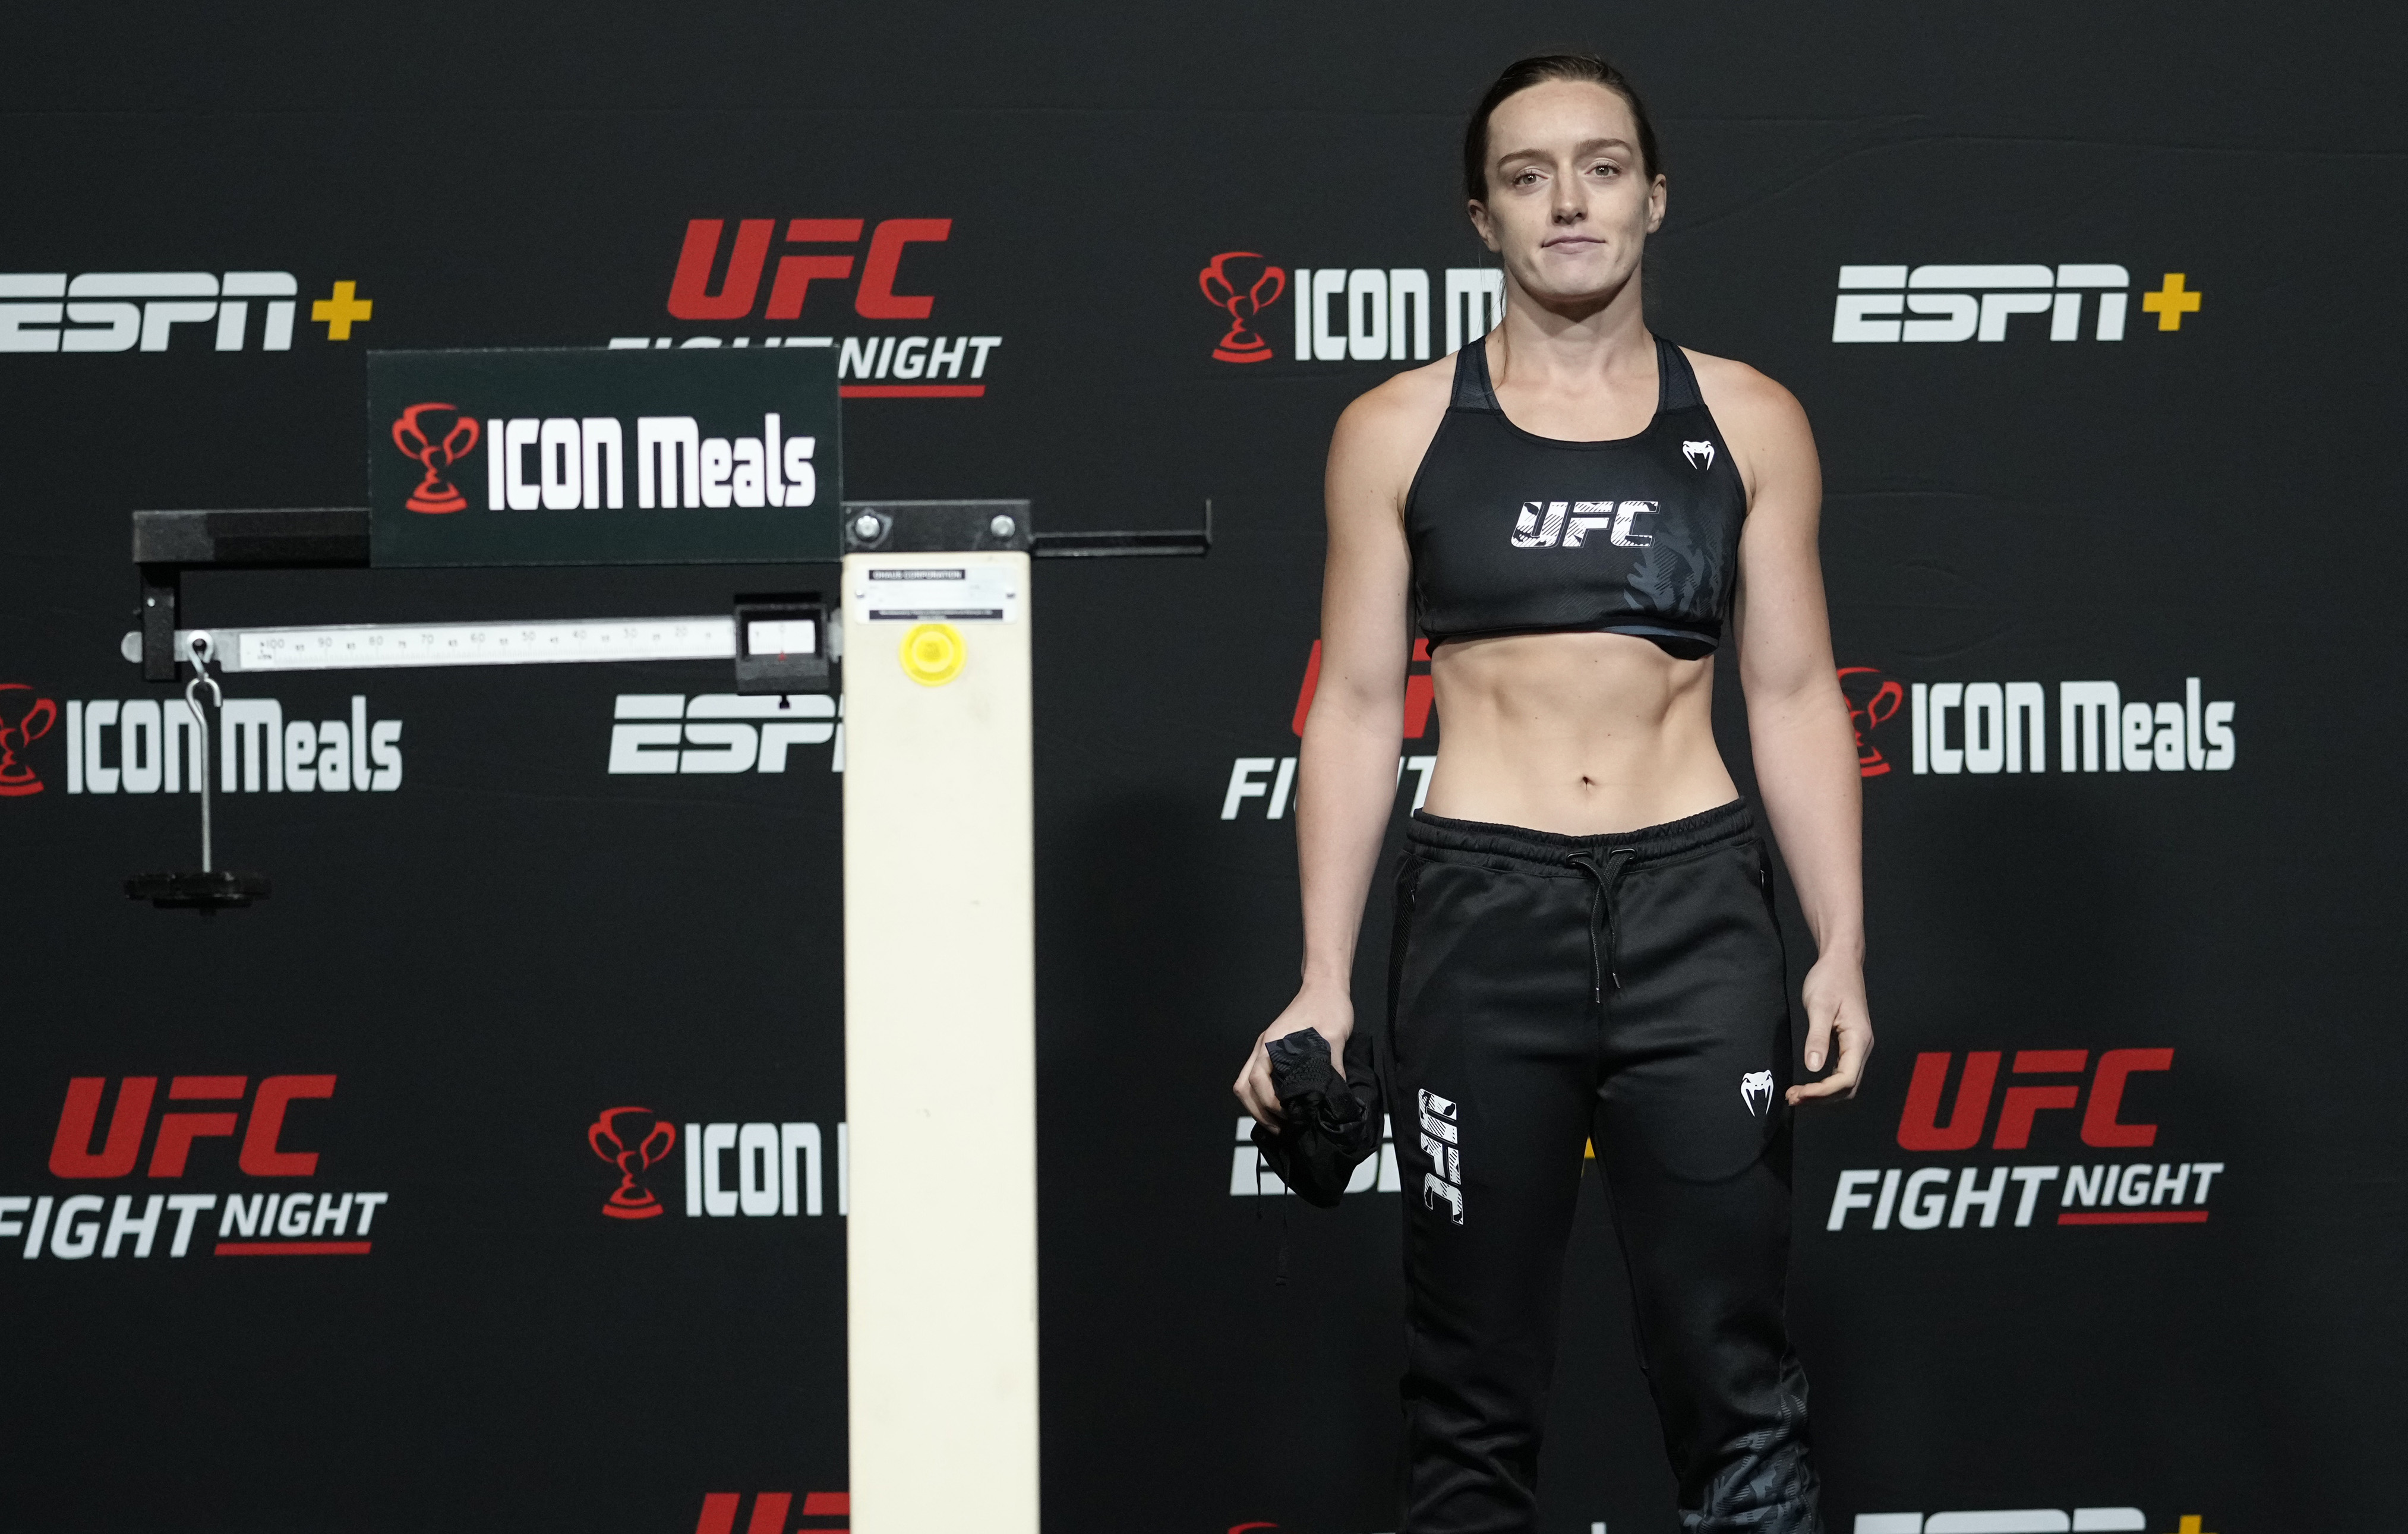 Aspen Lad weighs-in for her UFC bout against Macy Chiasson.